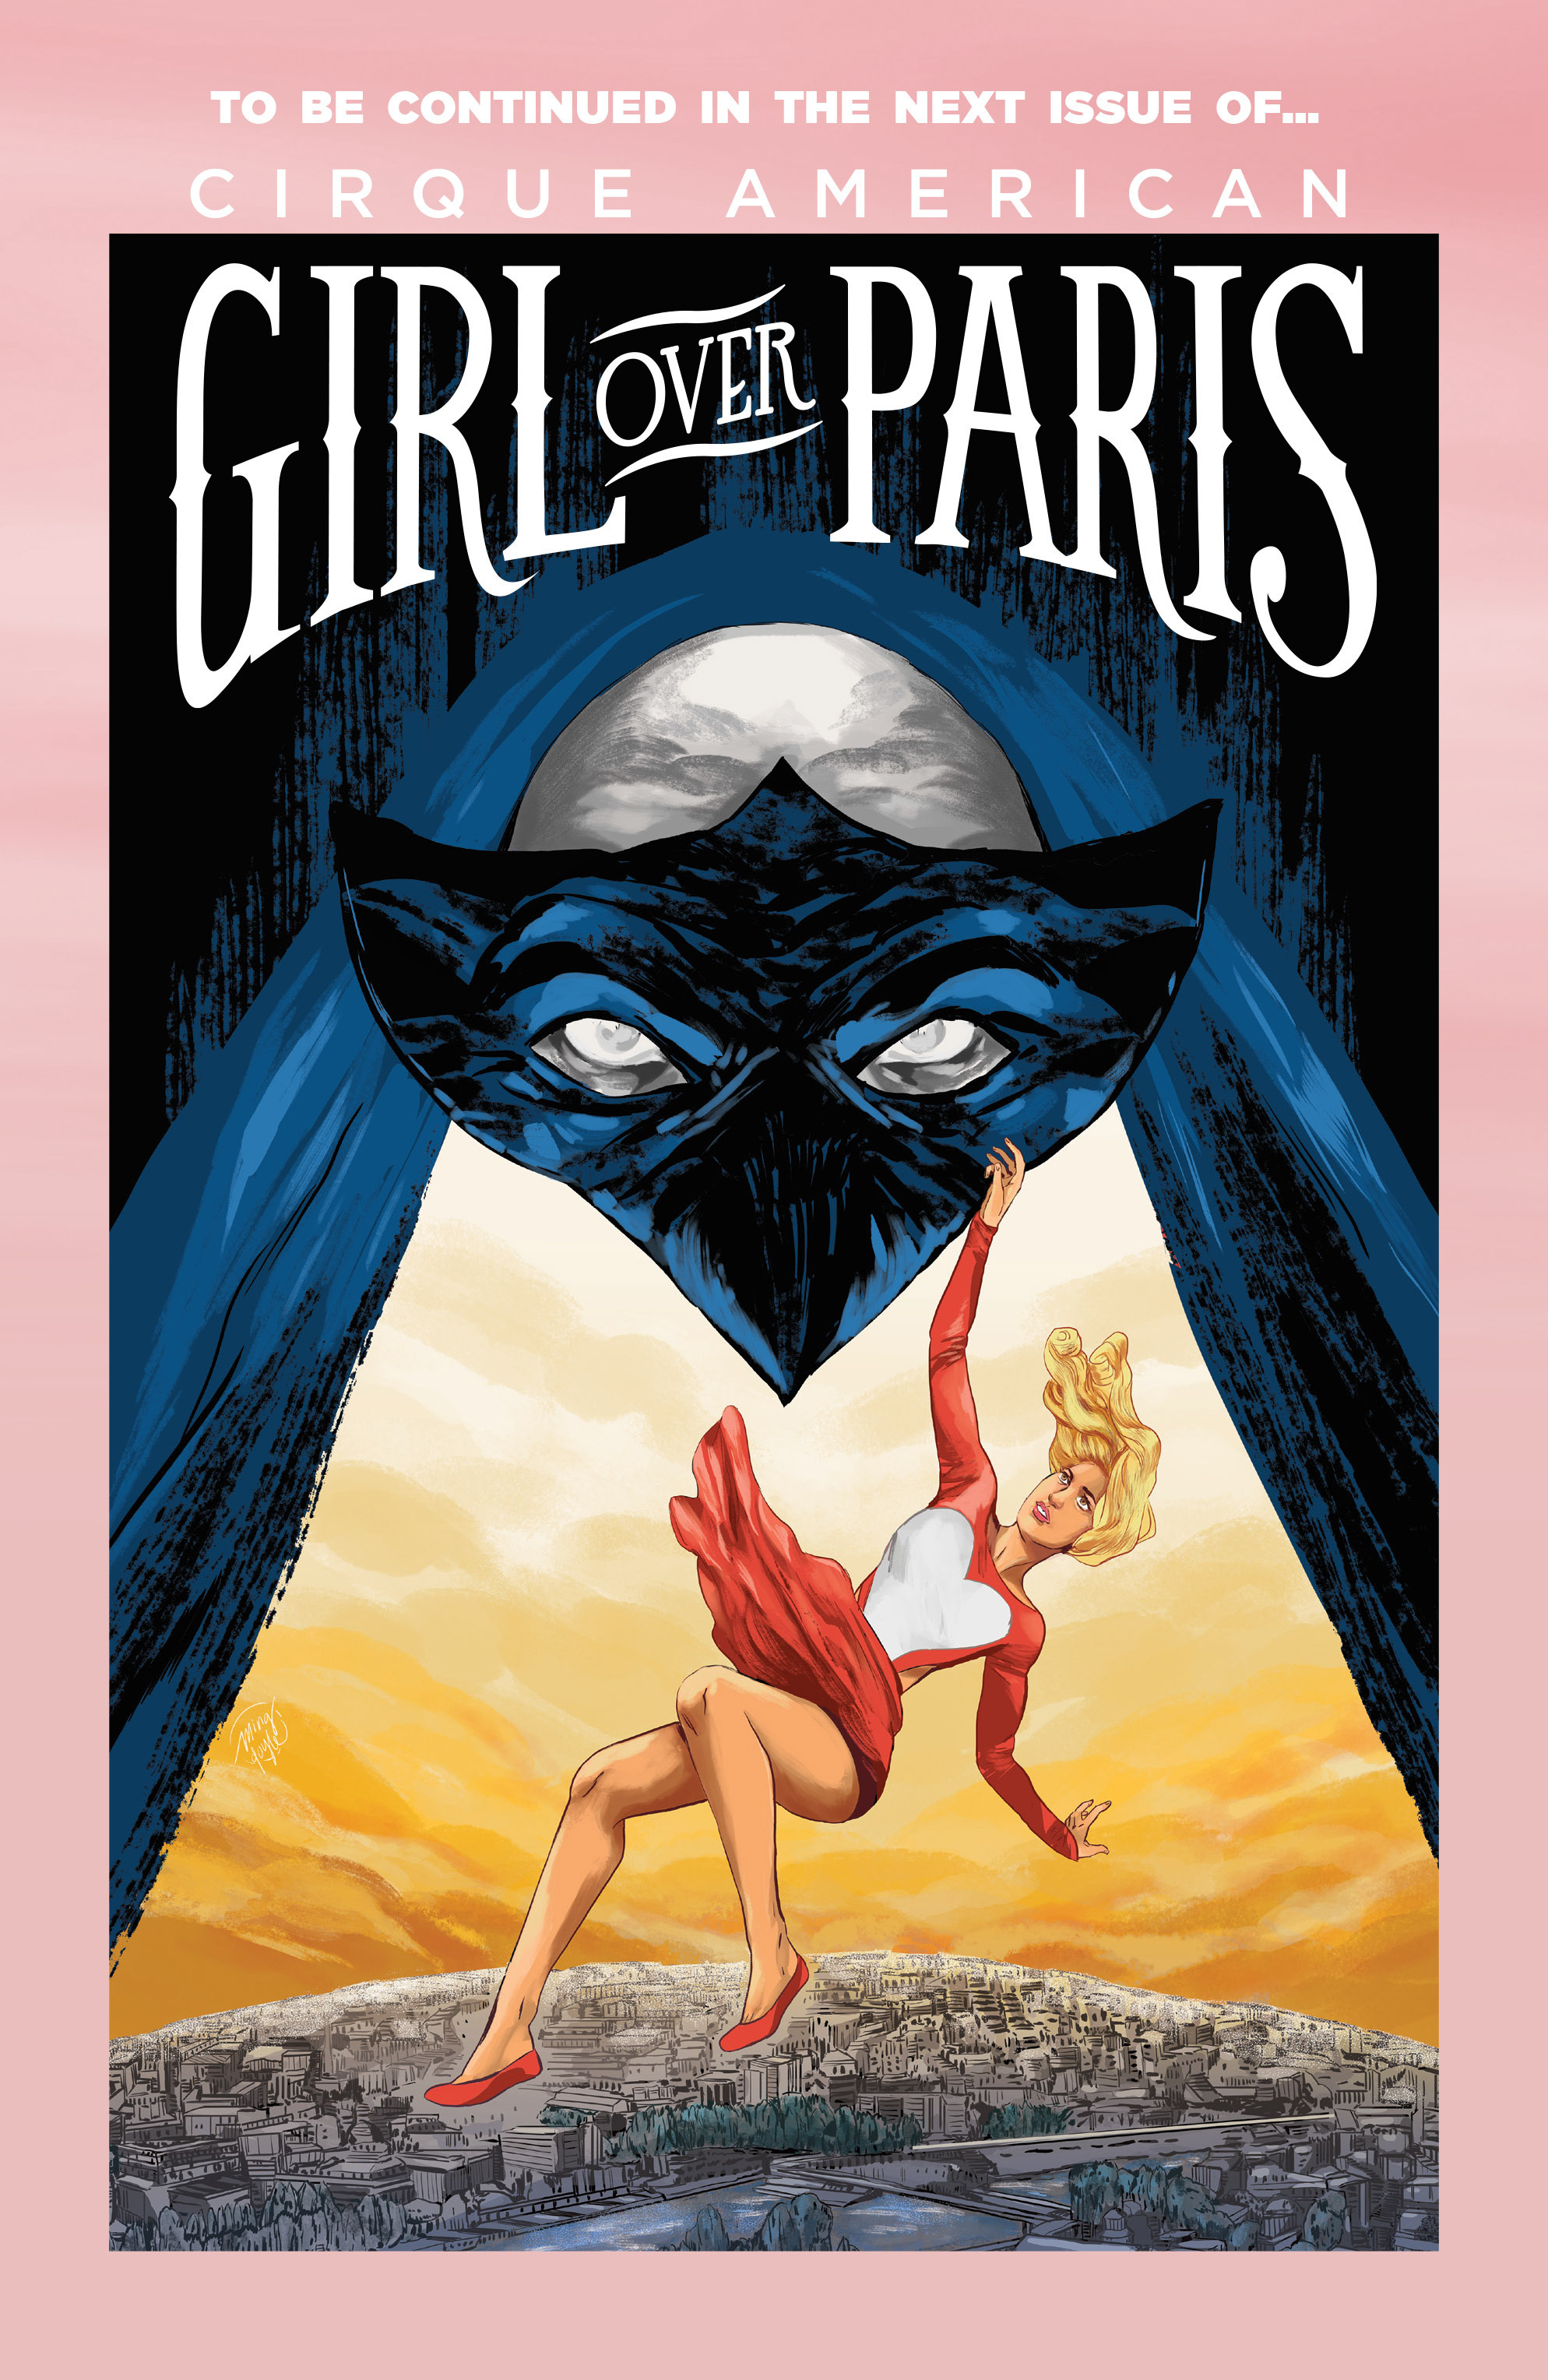 Read online Girl Over Paris (The Cirque American Series) comic -  Issue #1 - 25